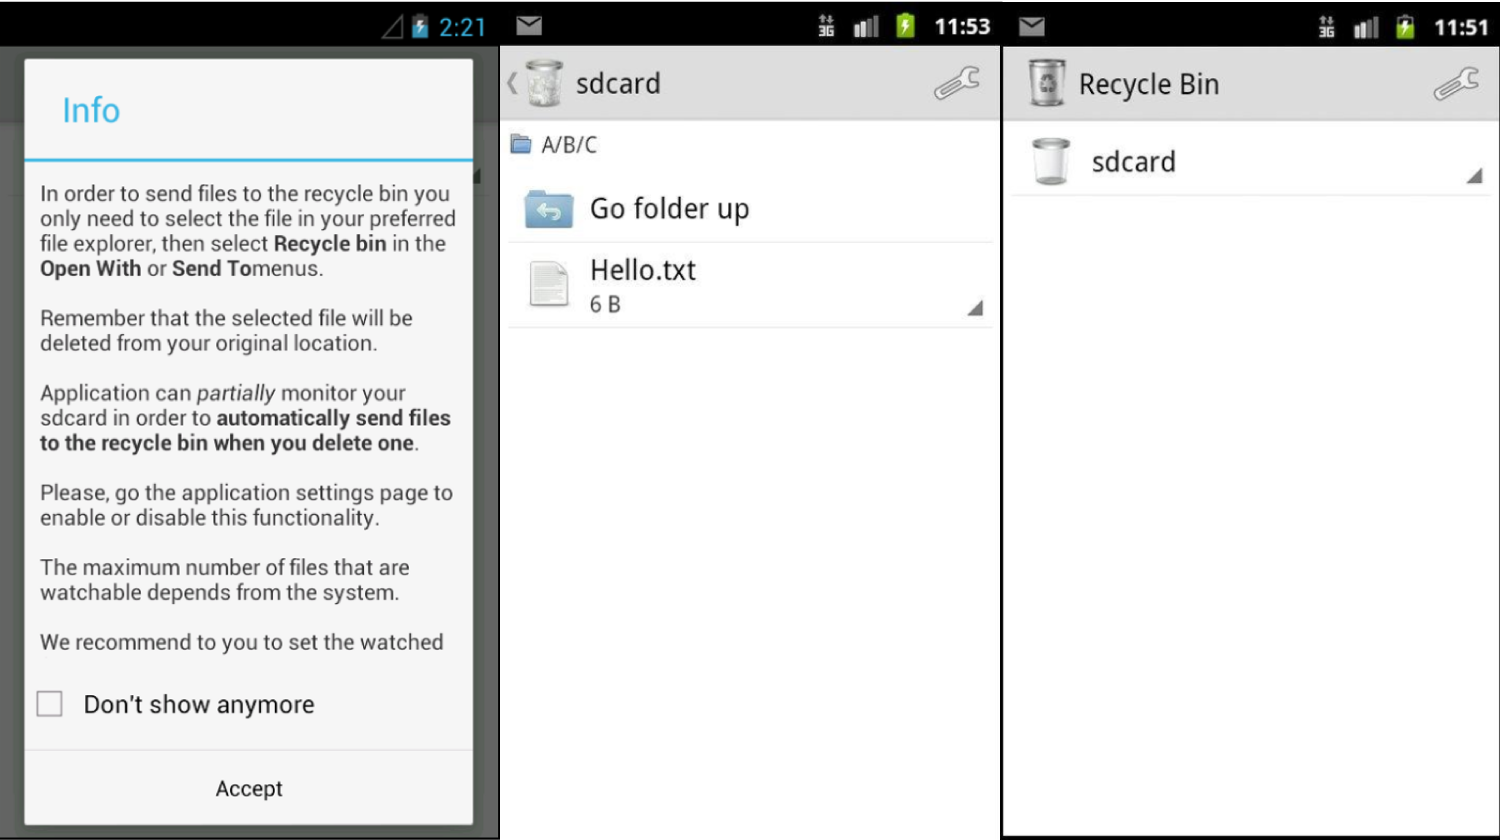 download the new version for android Auto Recycle Bin